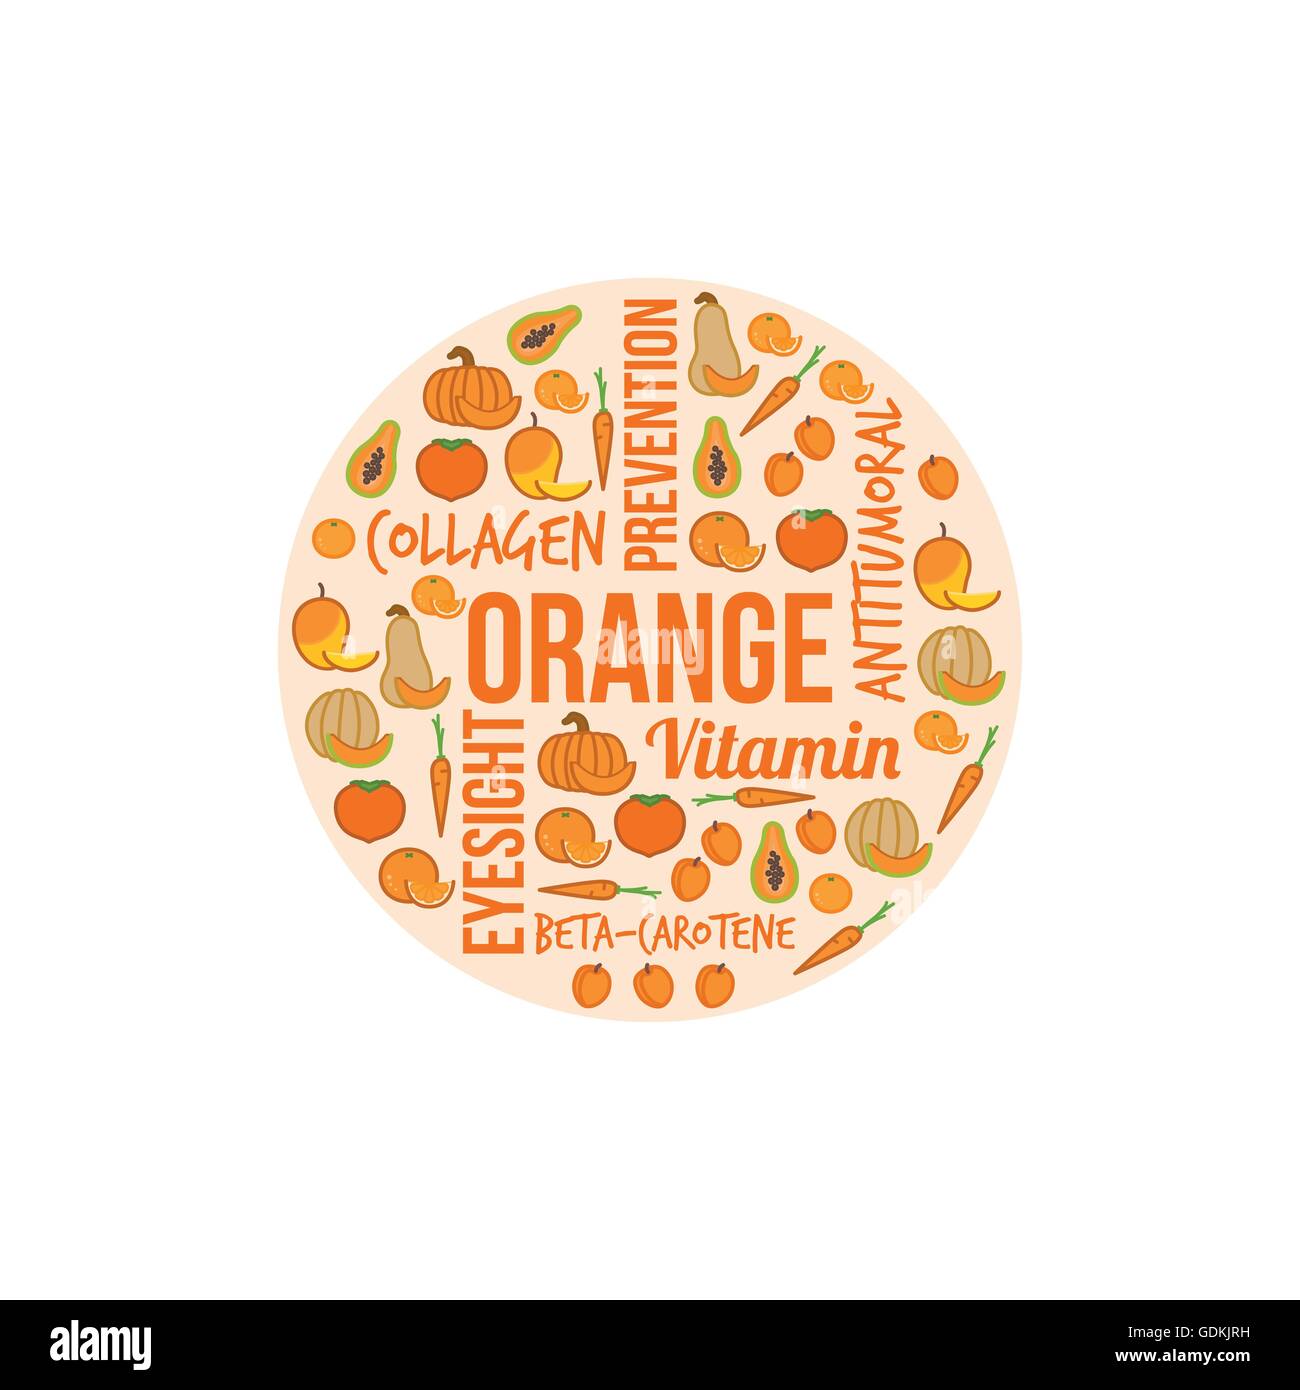 Orange vegetables and fruits with text concepts in a circular shape, dieting and nutrition concept Stock Vector